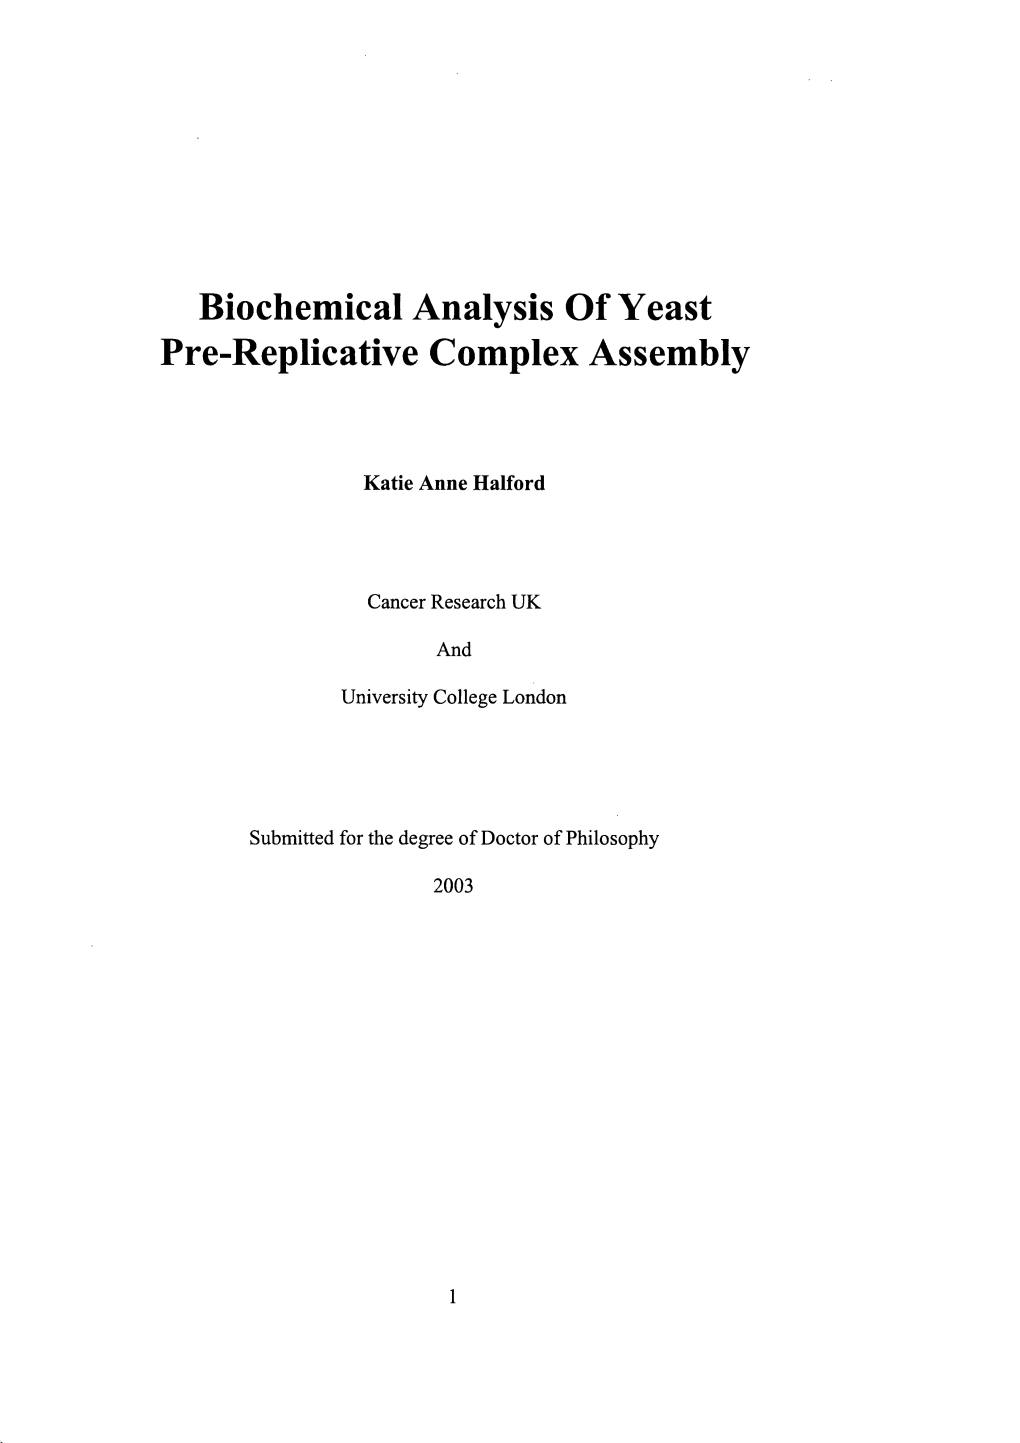 Biochemical Analysis of Yeast Pre-Replicative Complex Assembly